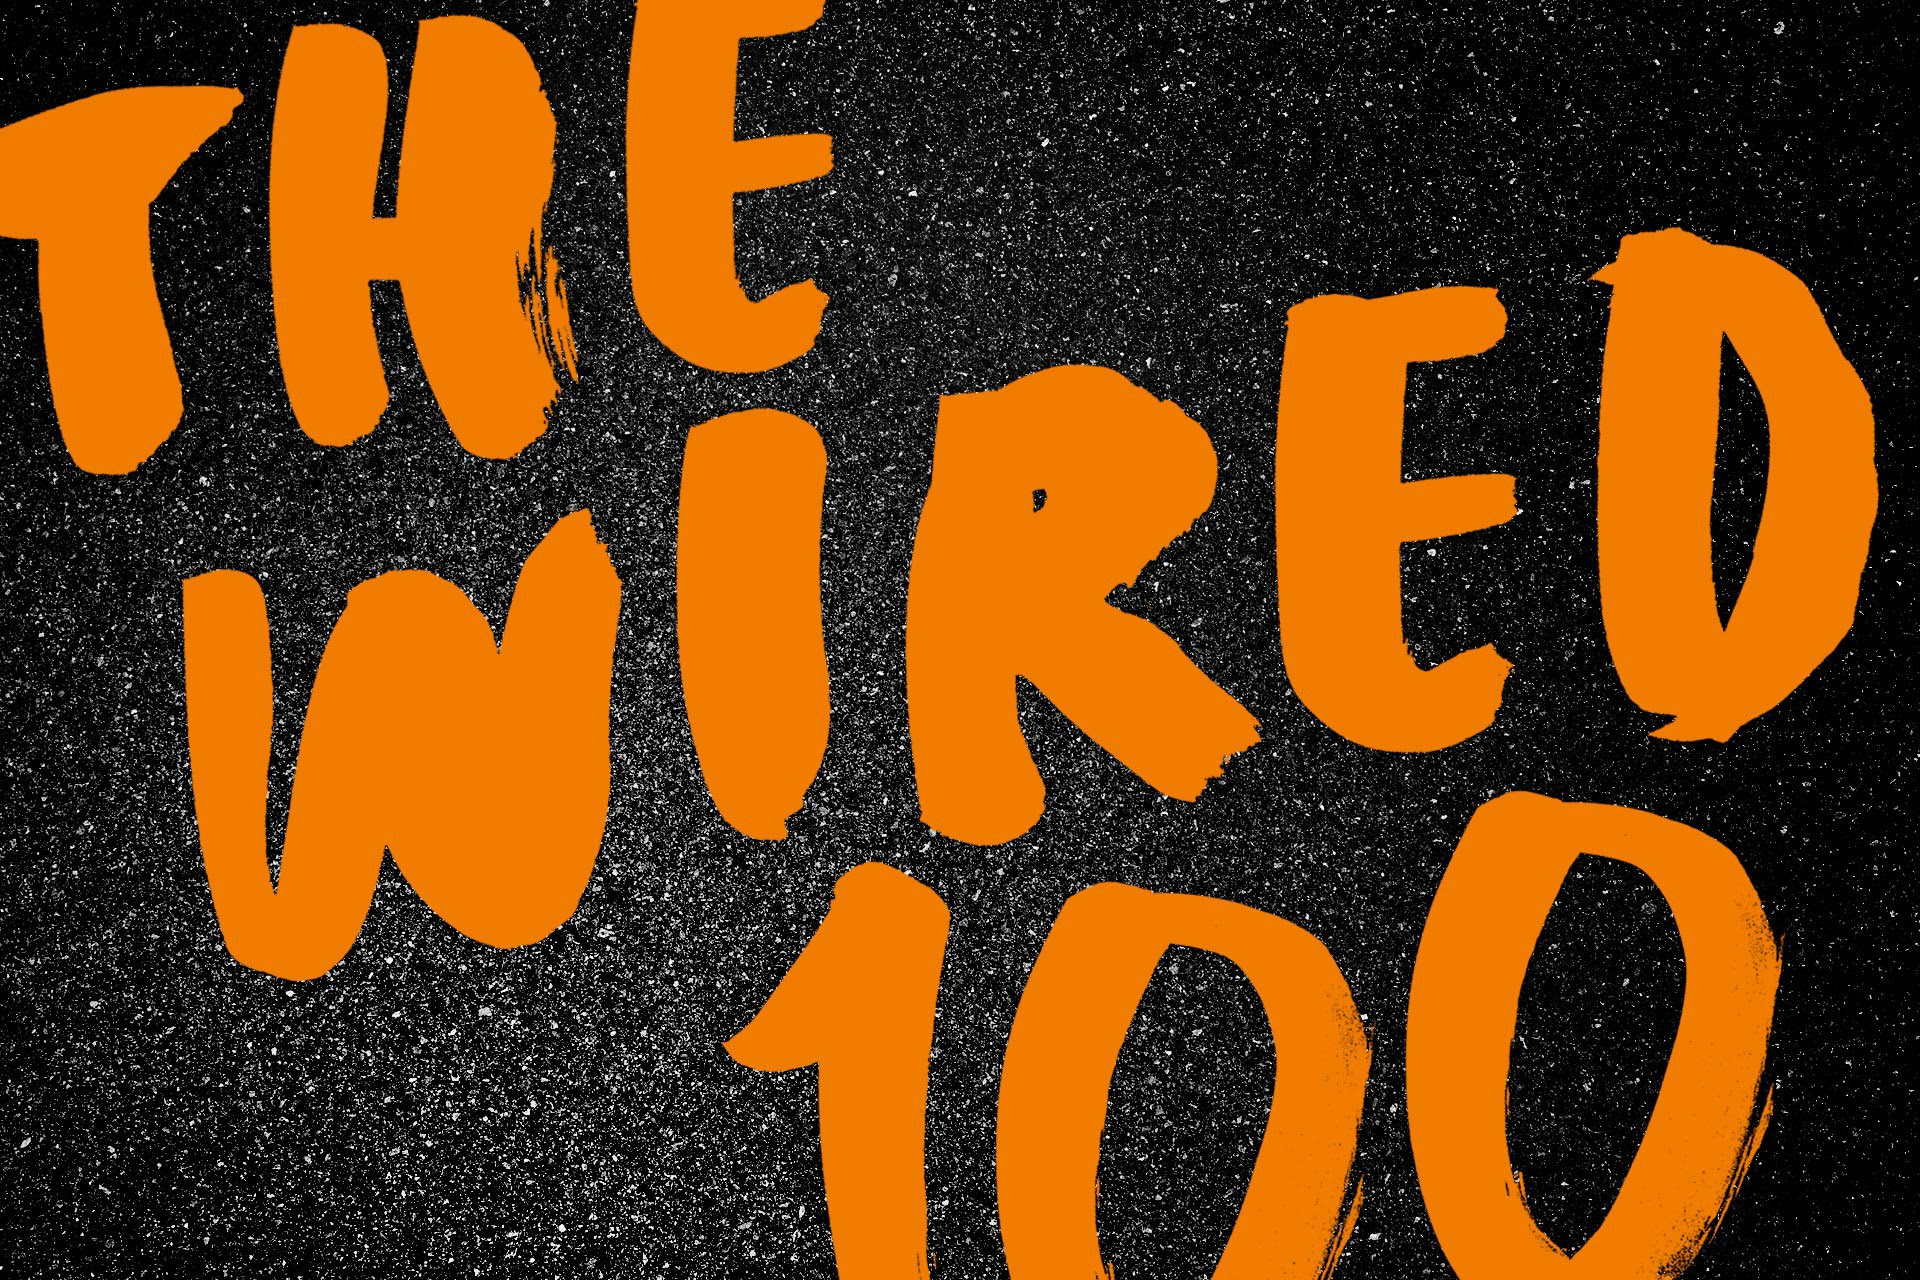 THE 2015 WIRED 100